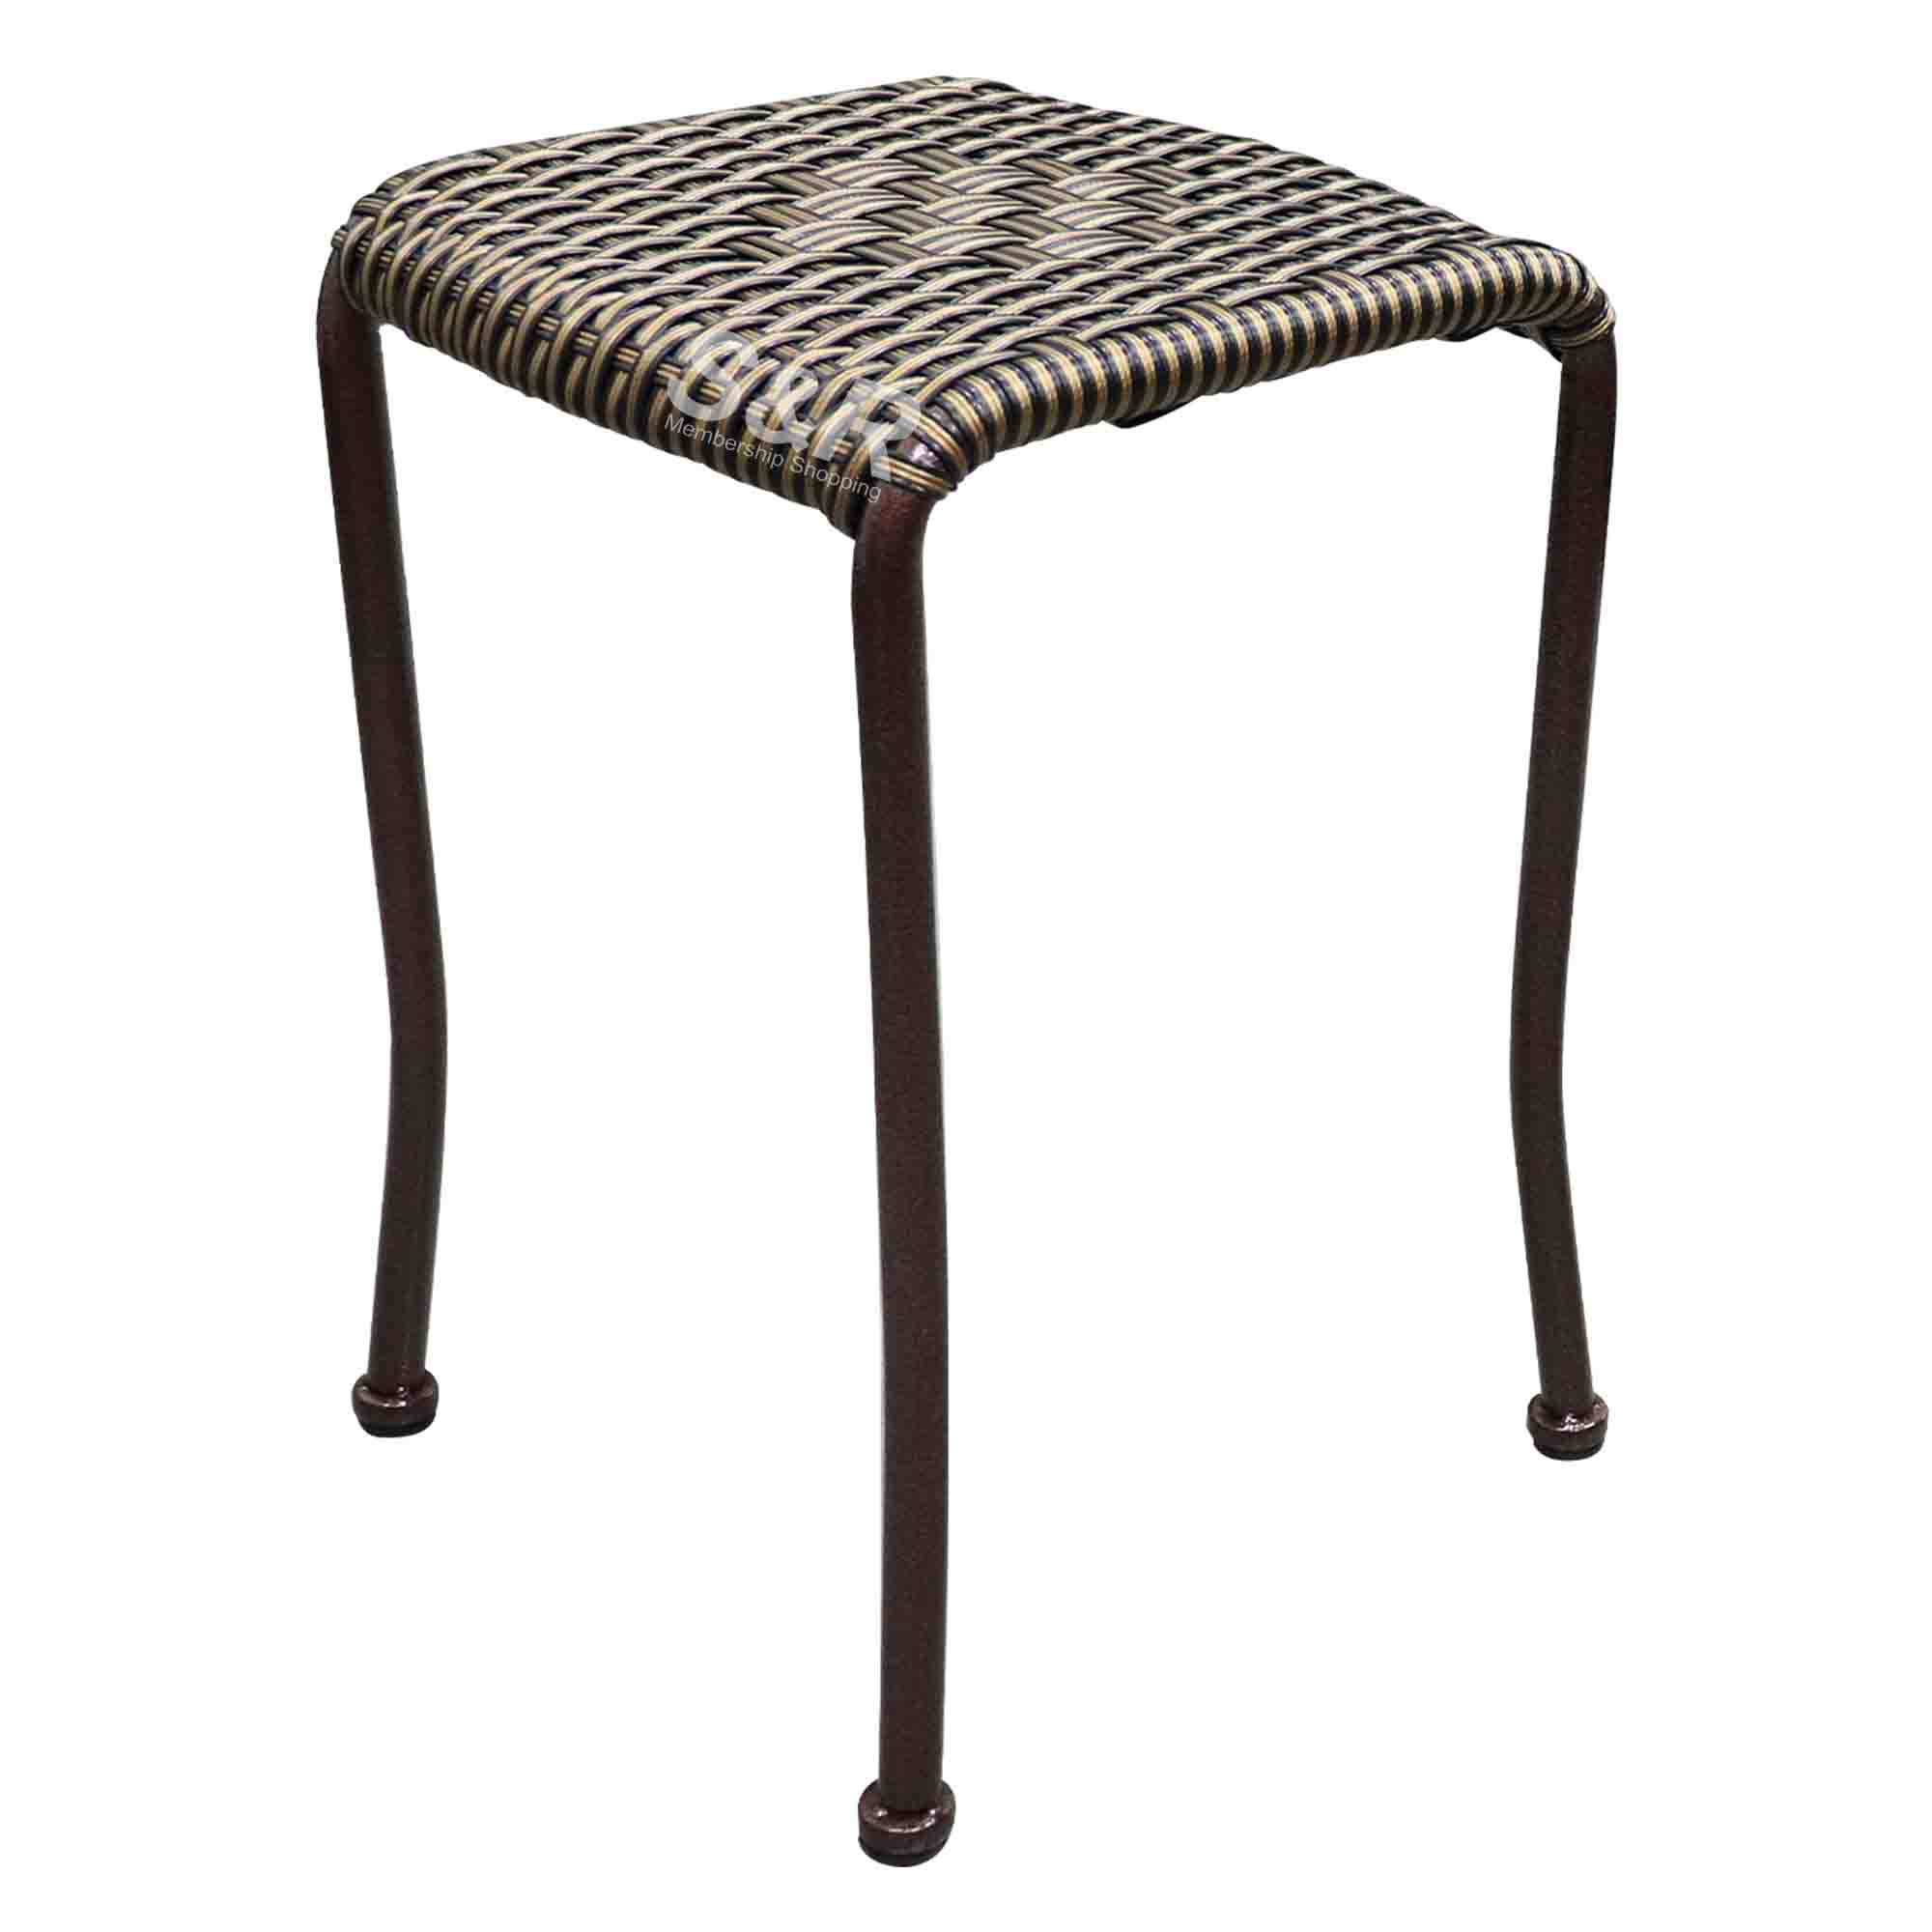 HiLives PE Rattan Middle Stool 1pc